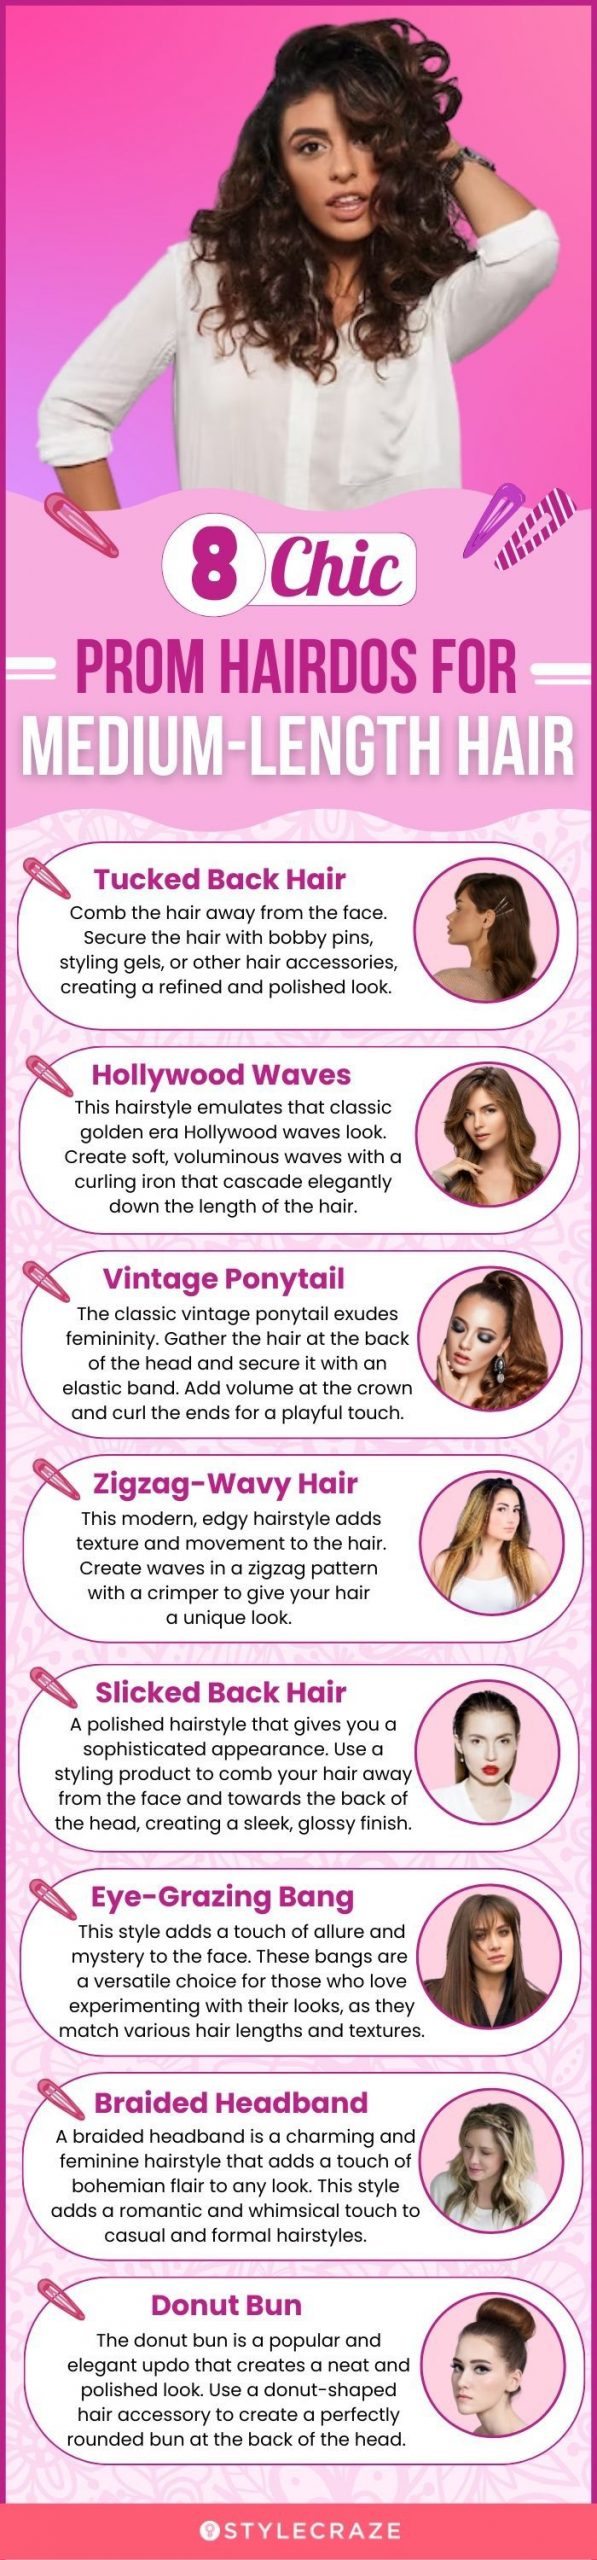 7 Easy Prom Hairstyles For All Hair Lengths - Orlando Surgical Repair